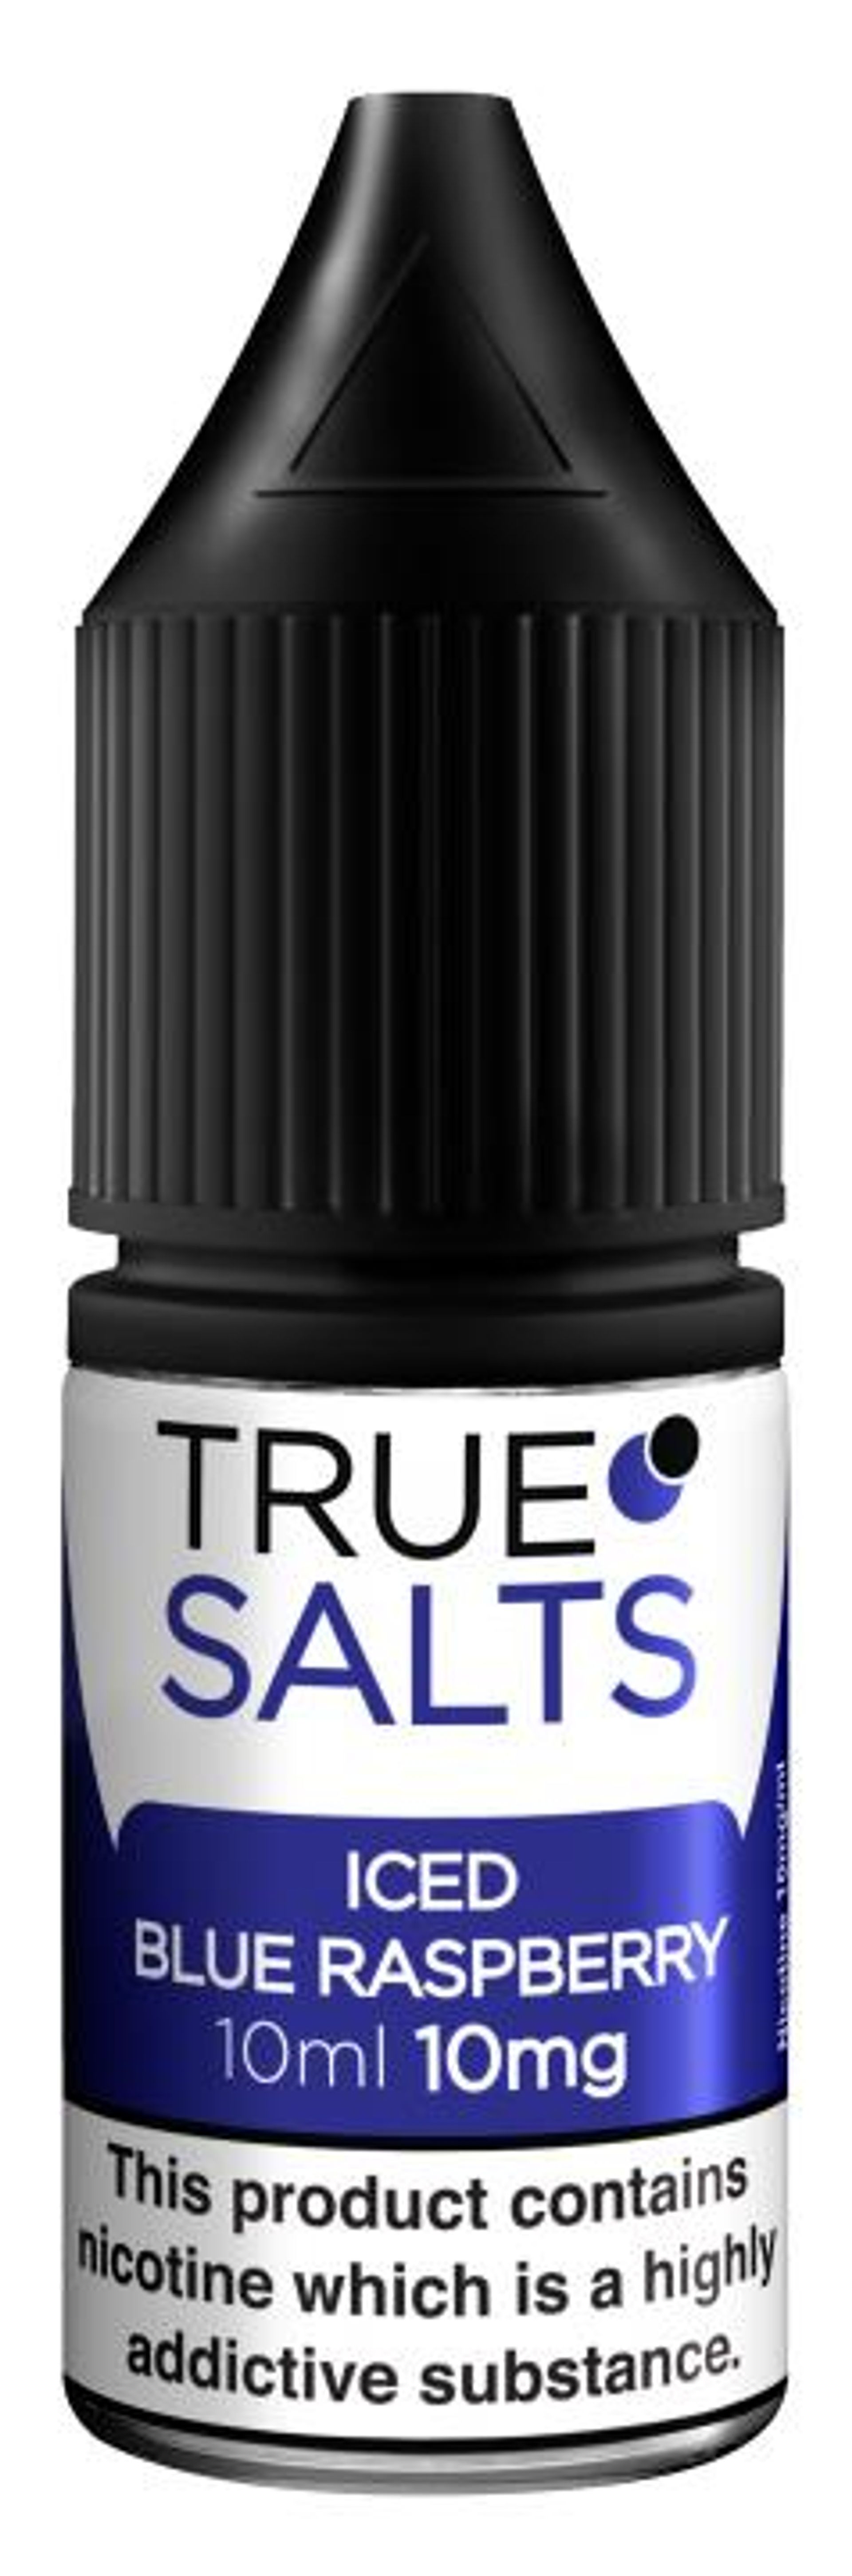 Image of Iced Blue Raspberry by True Salts